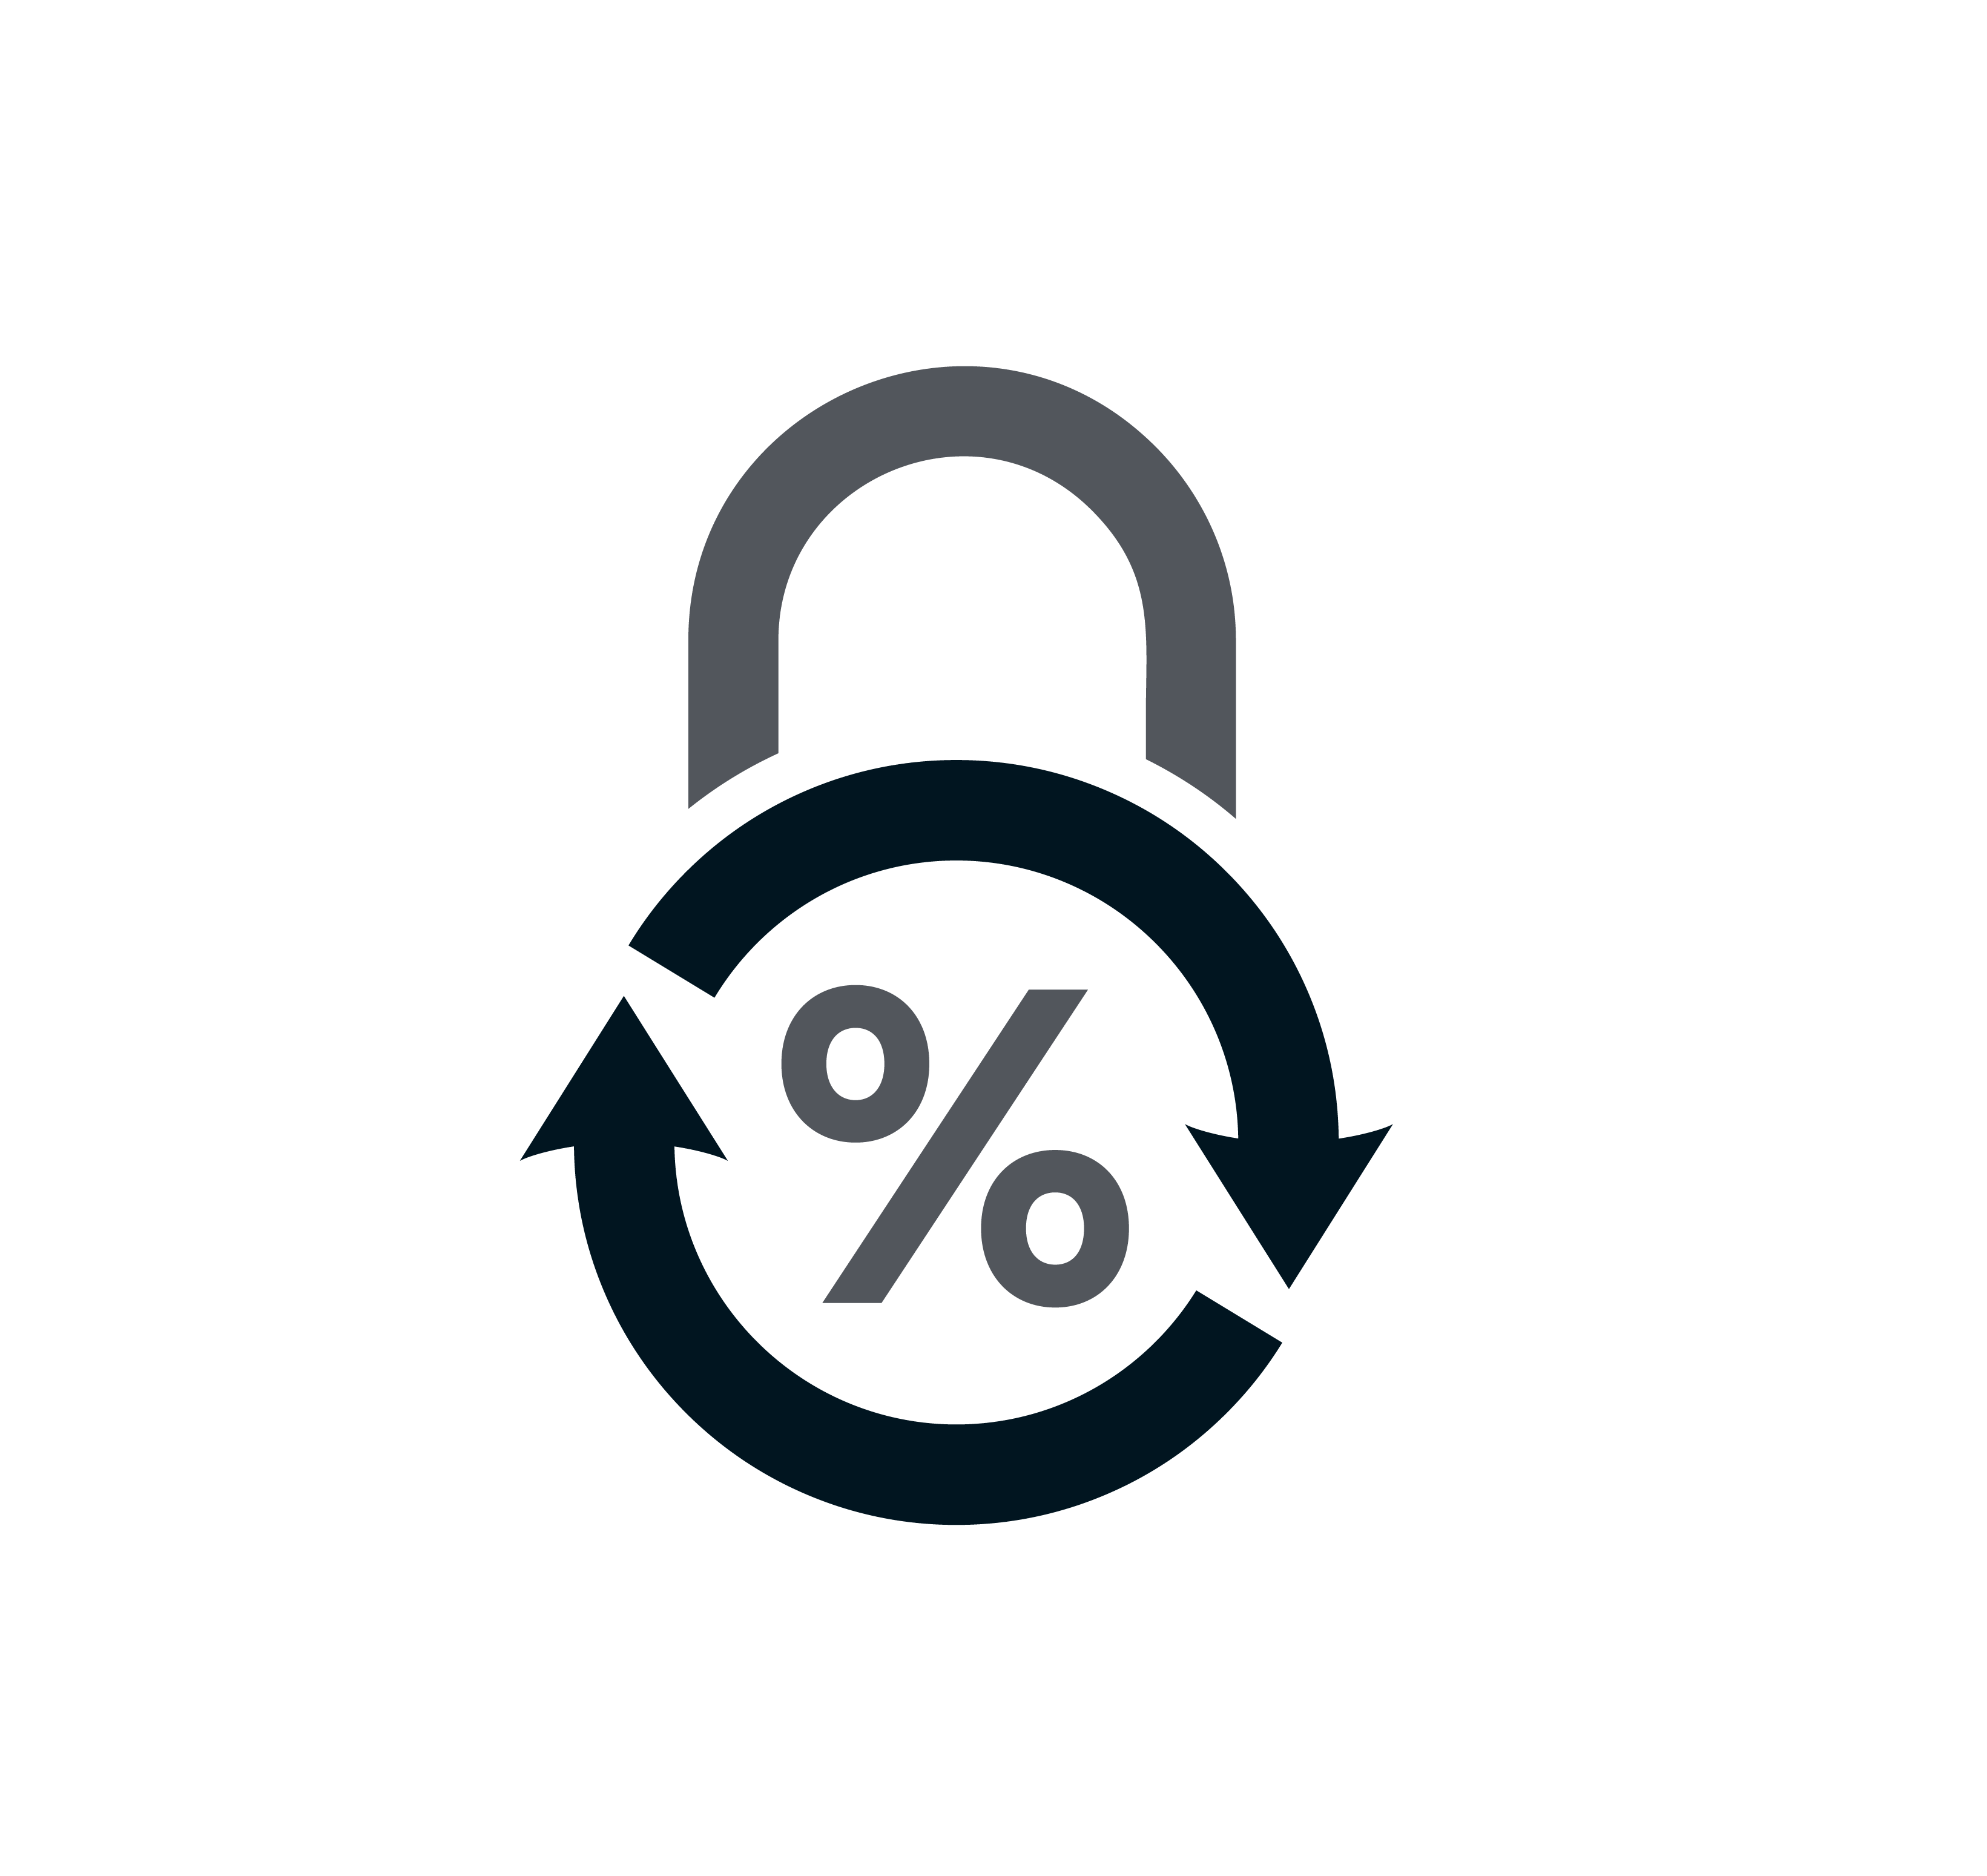 Worried rates may rise? Lock yours in with Lock & Shop!***